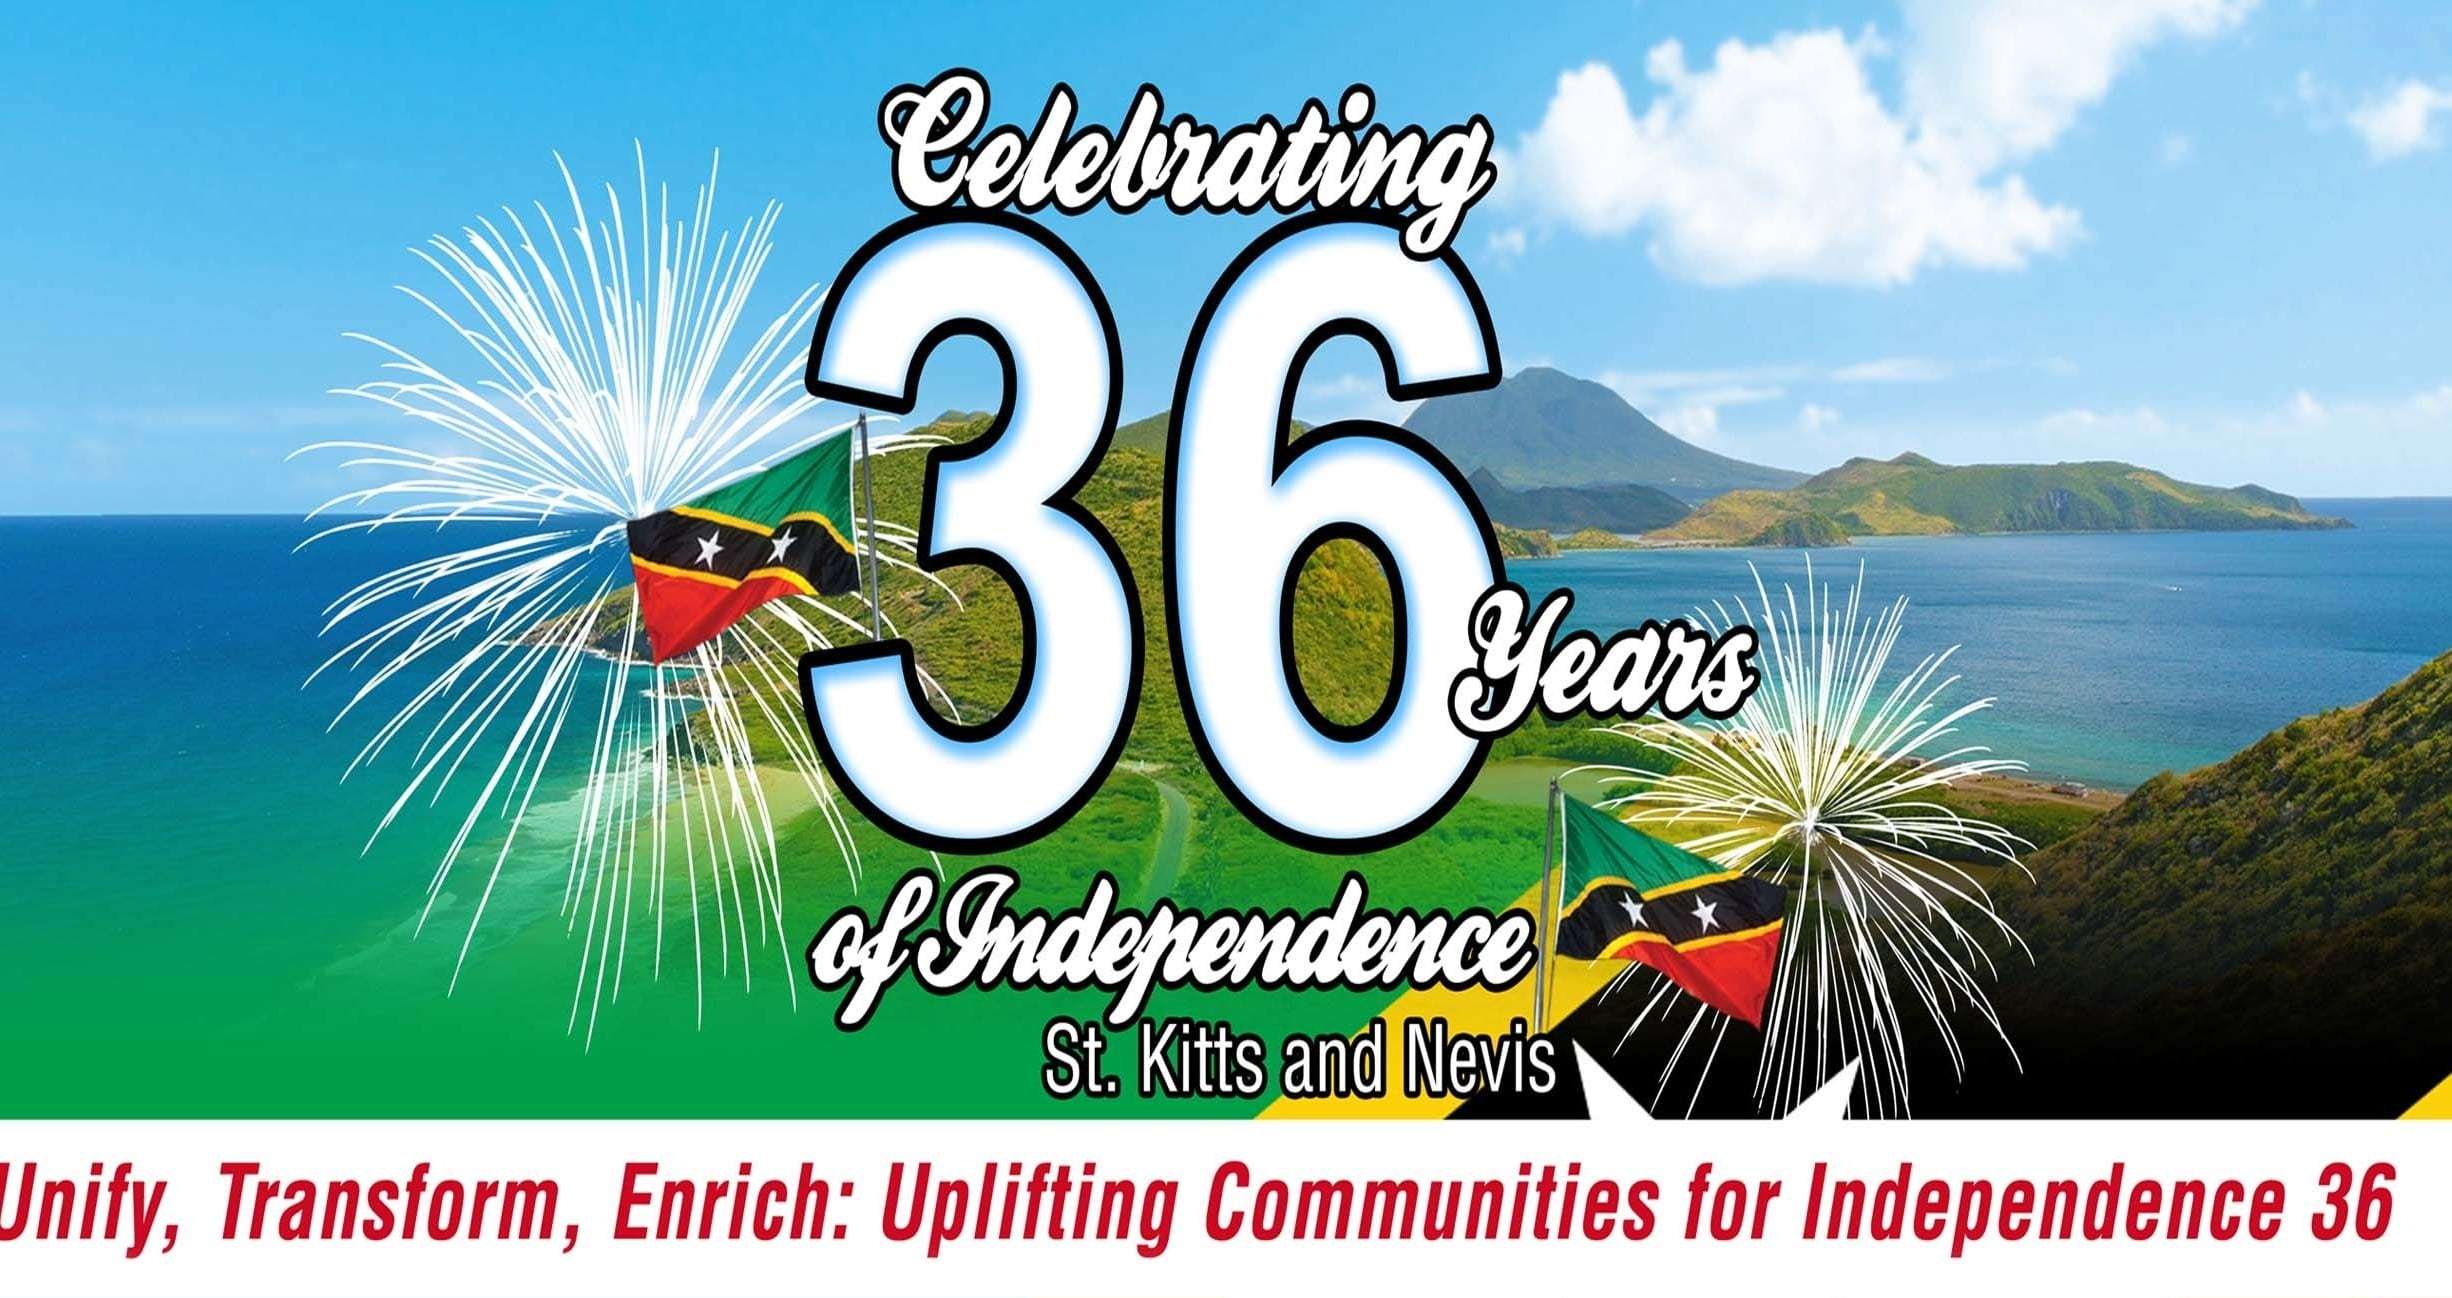 CARICOM congratulates St Kitts and Nevis on 36th Independence Anniversary